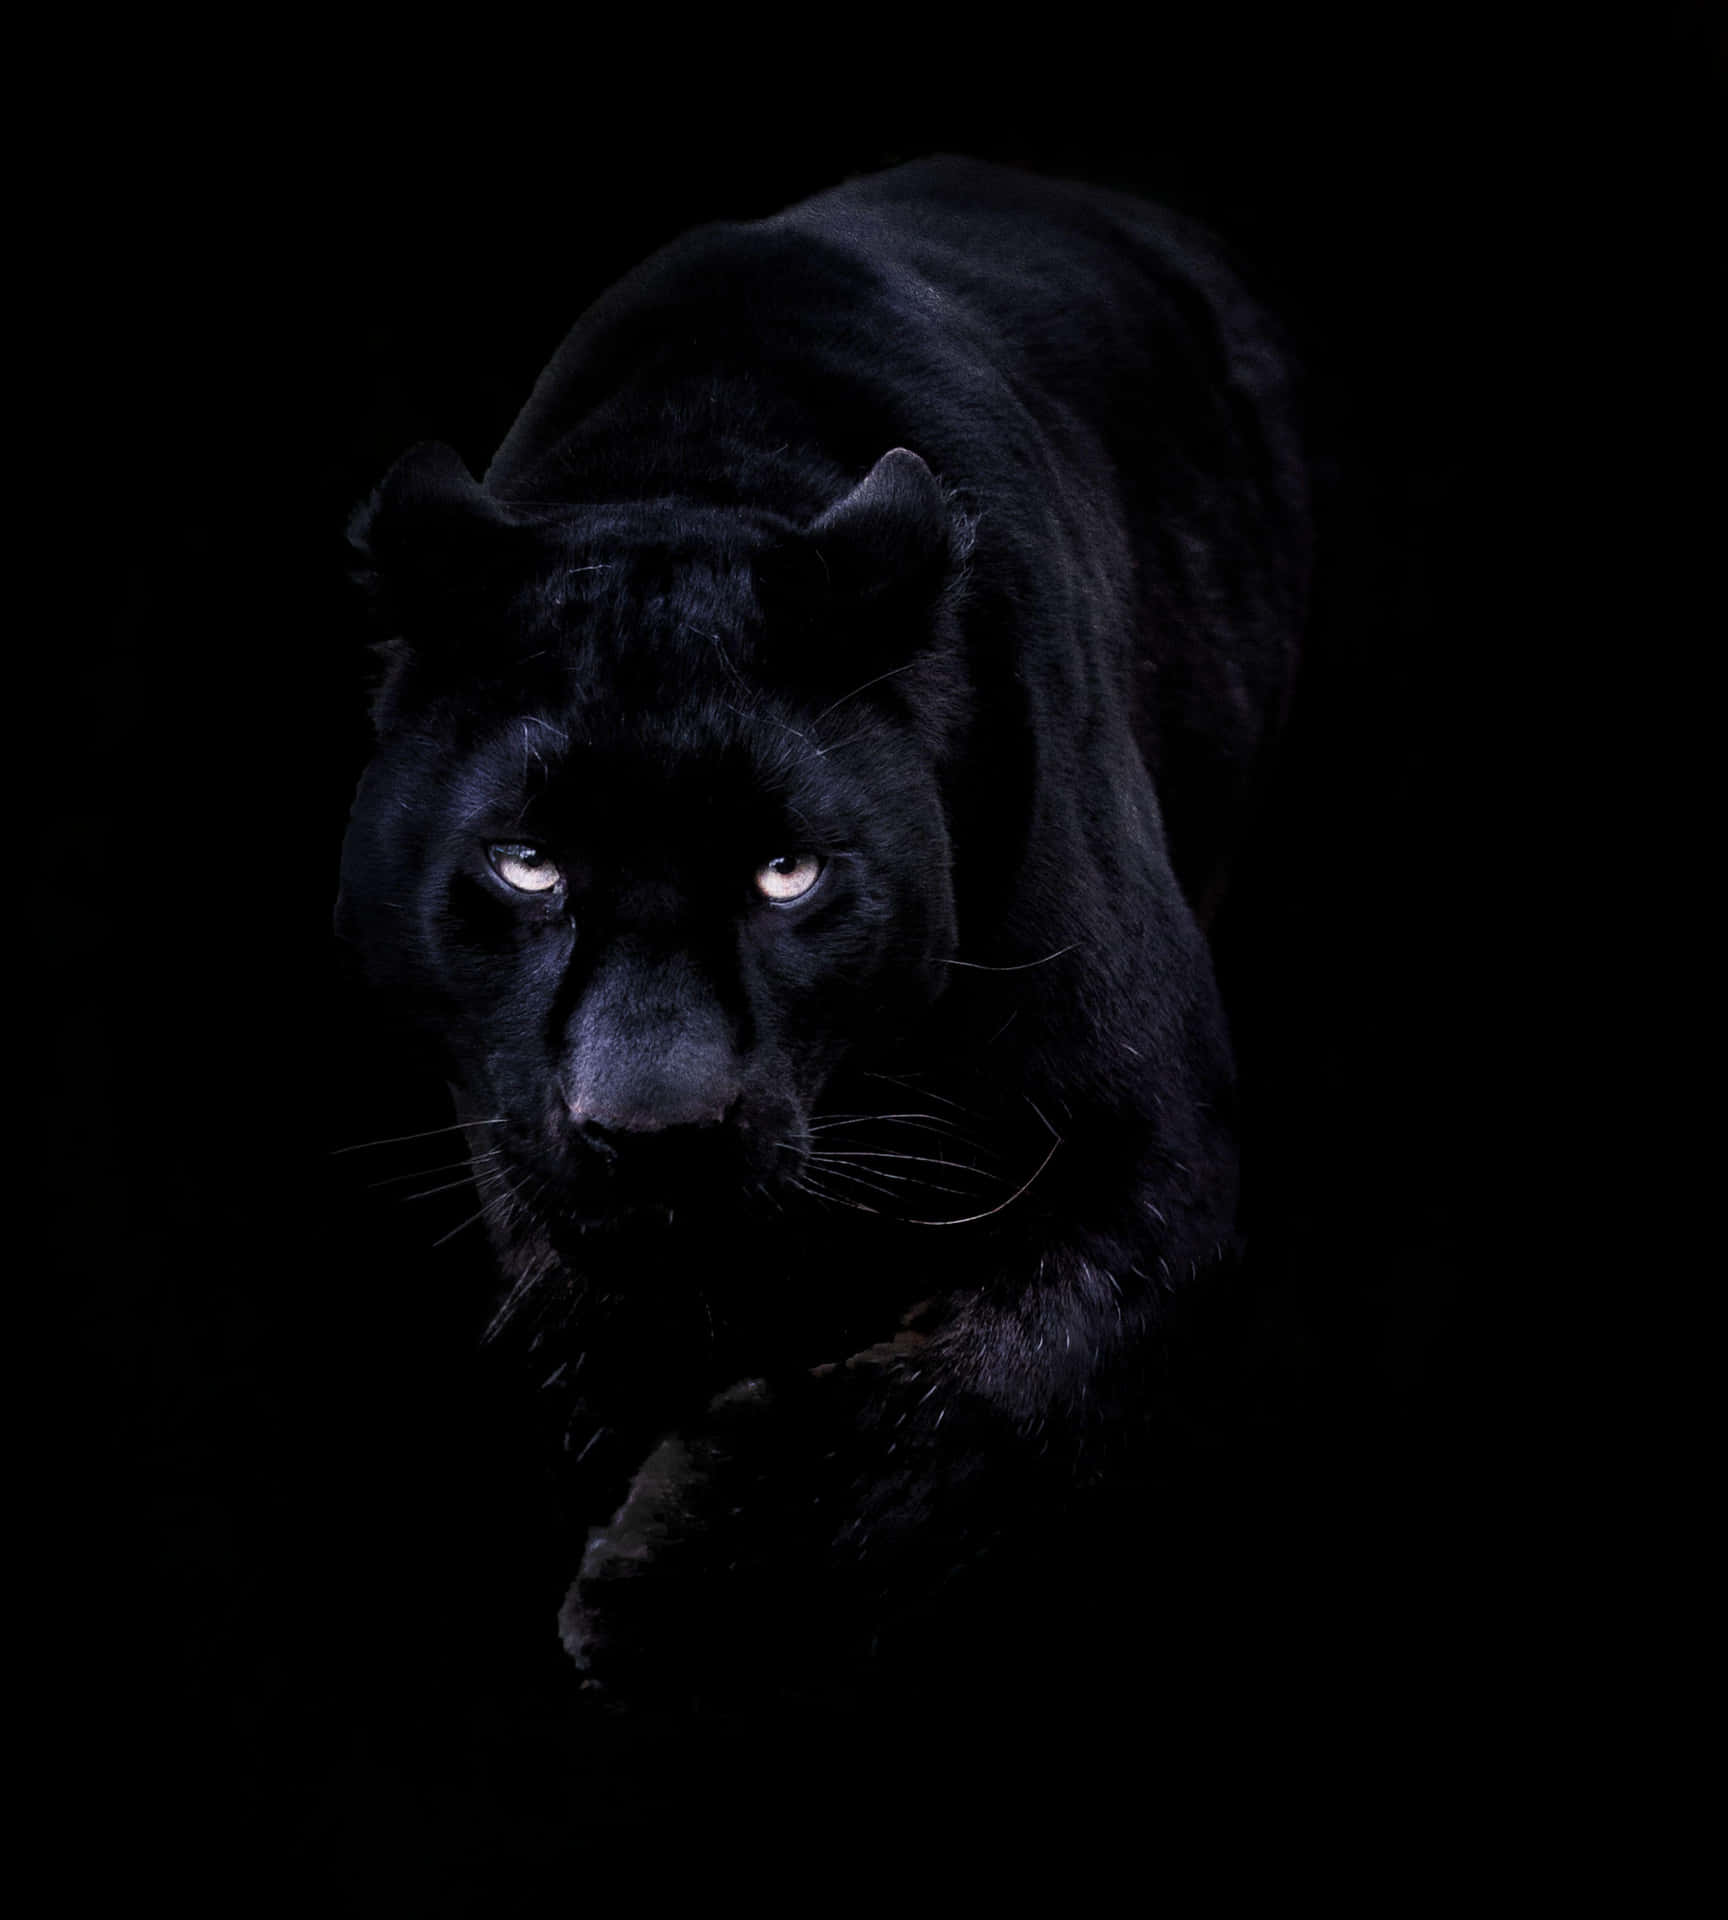 The fearless Black Panther in all his glory